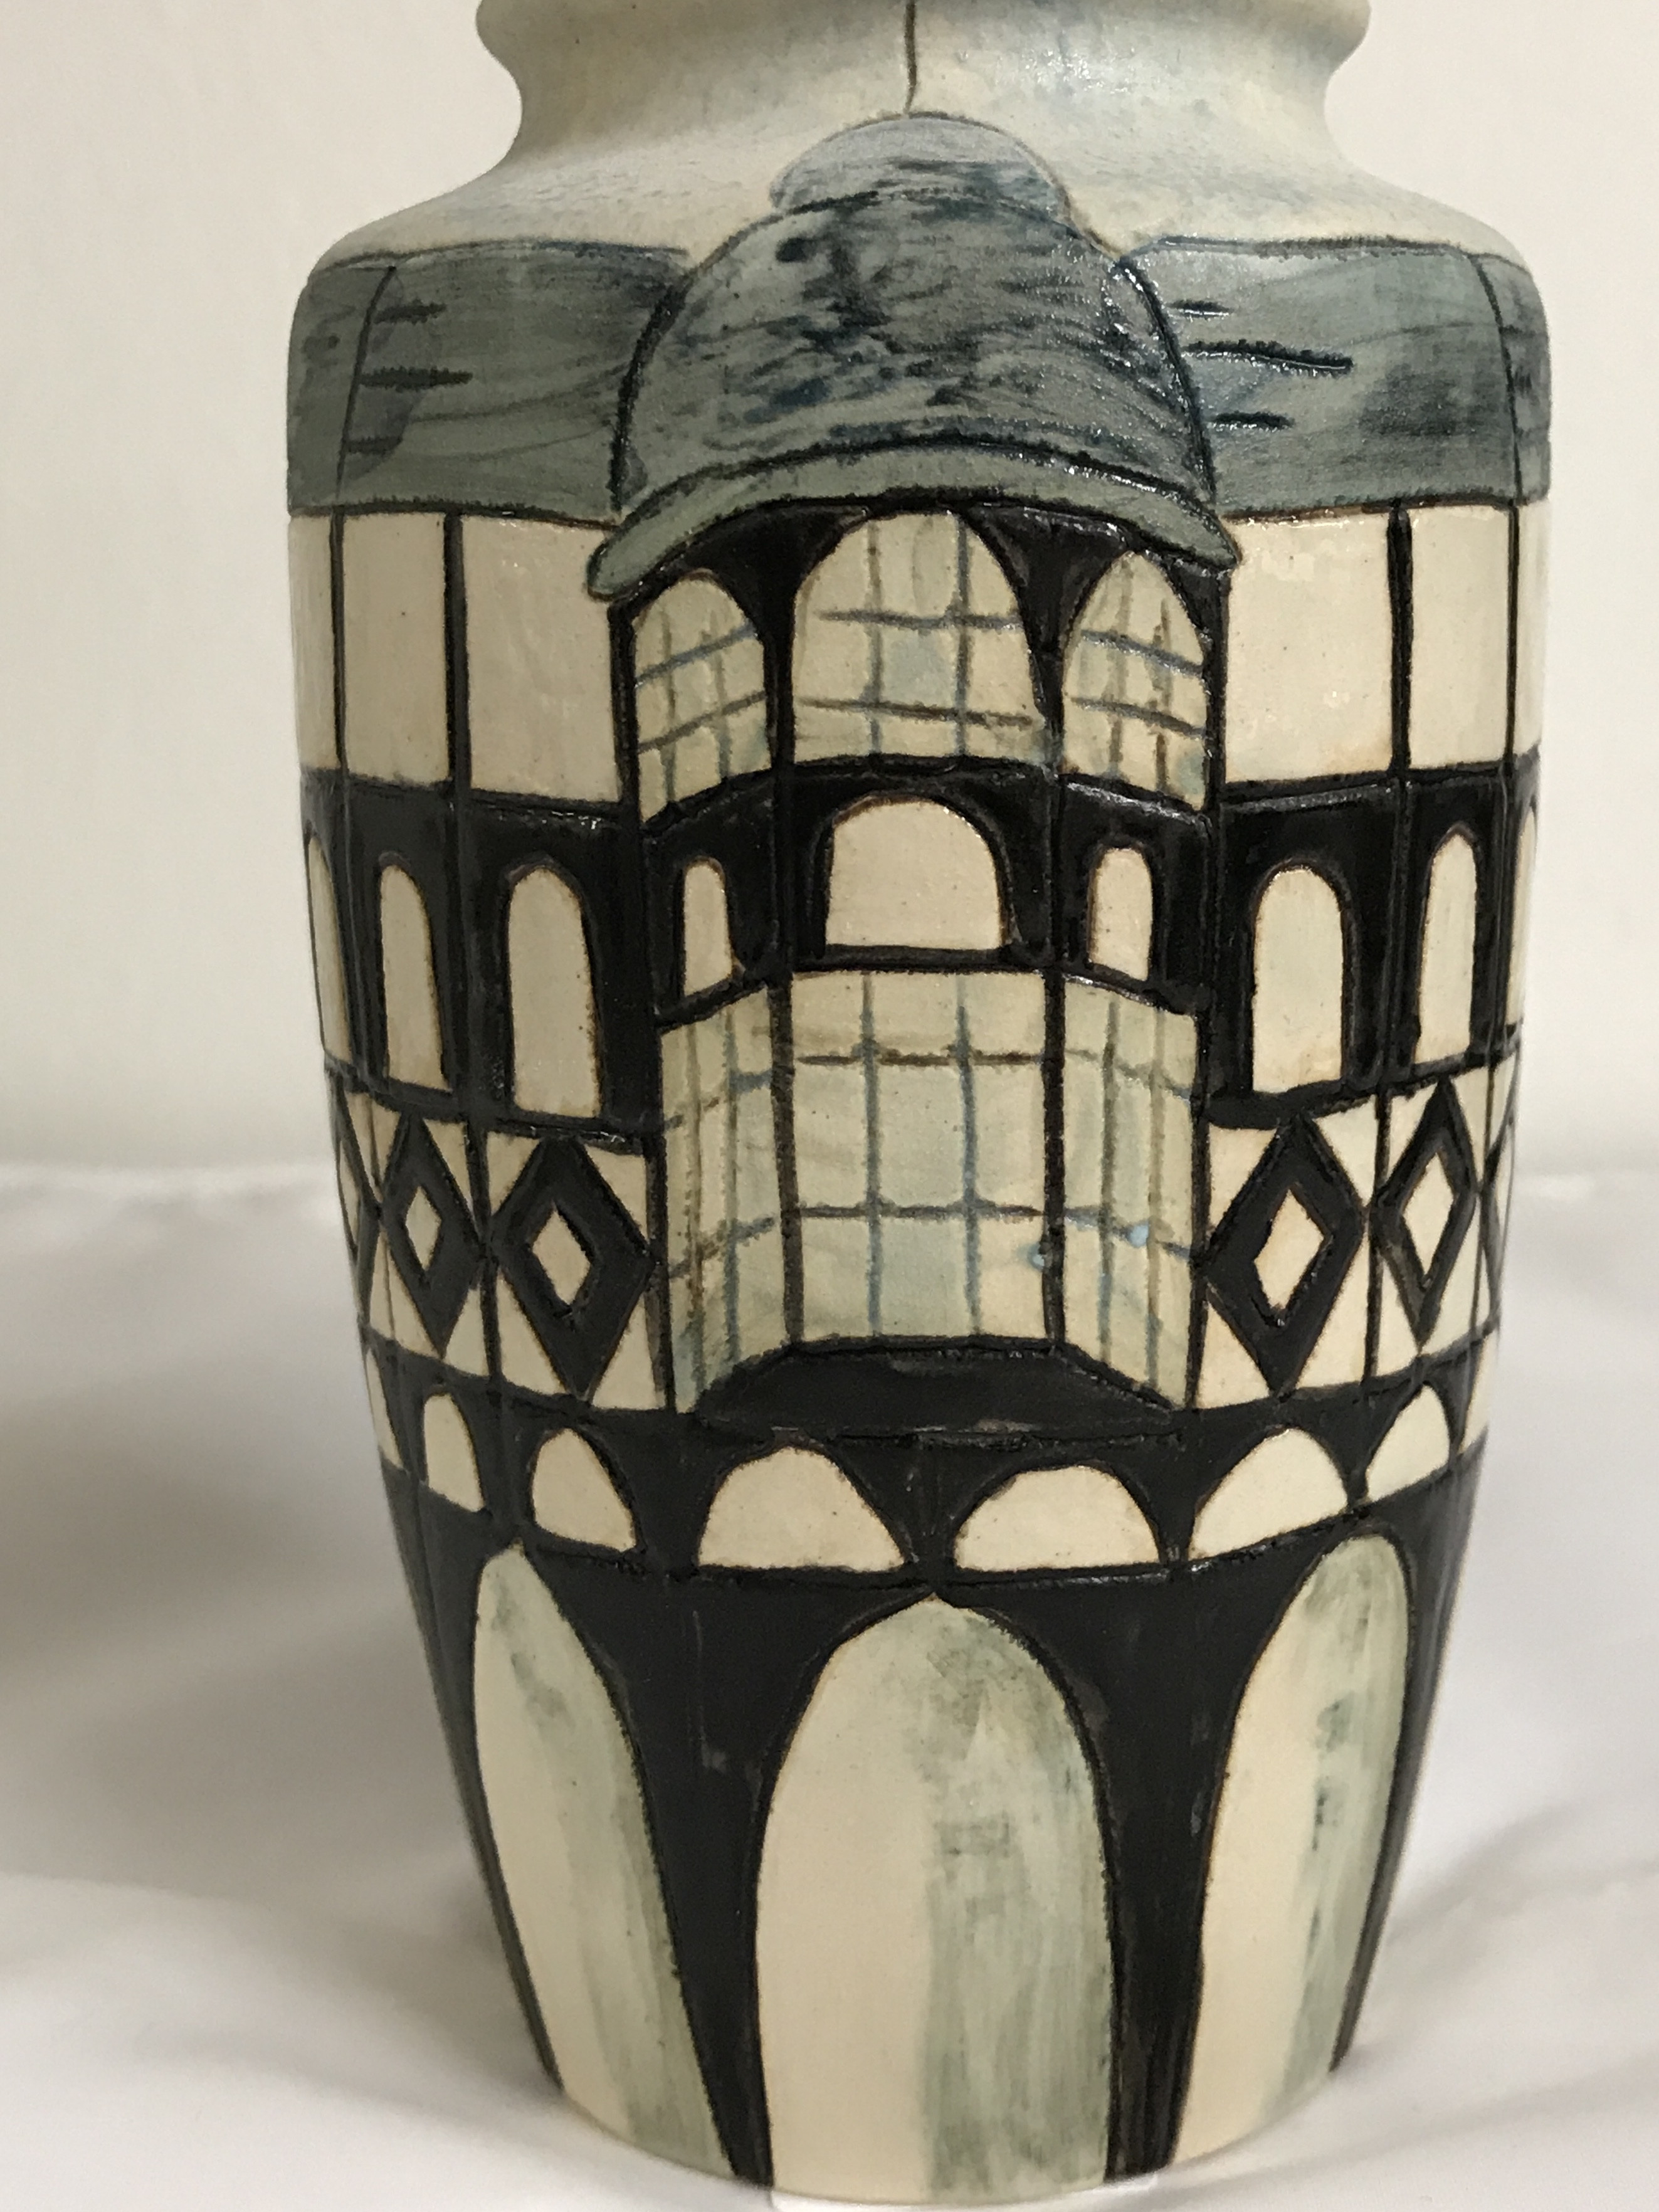 30 Popular Blown Glass Teardrop Vases 2024 free download blown glass teardrop vases of burslem pottery designed vase shop stoke on trent intended for this vase depicts the black and white half timber buildings of chester this vase was done as a sh